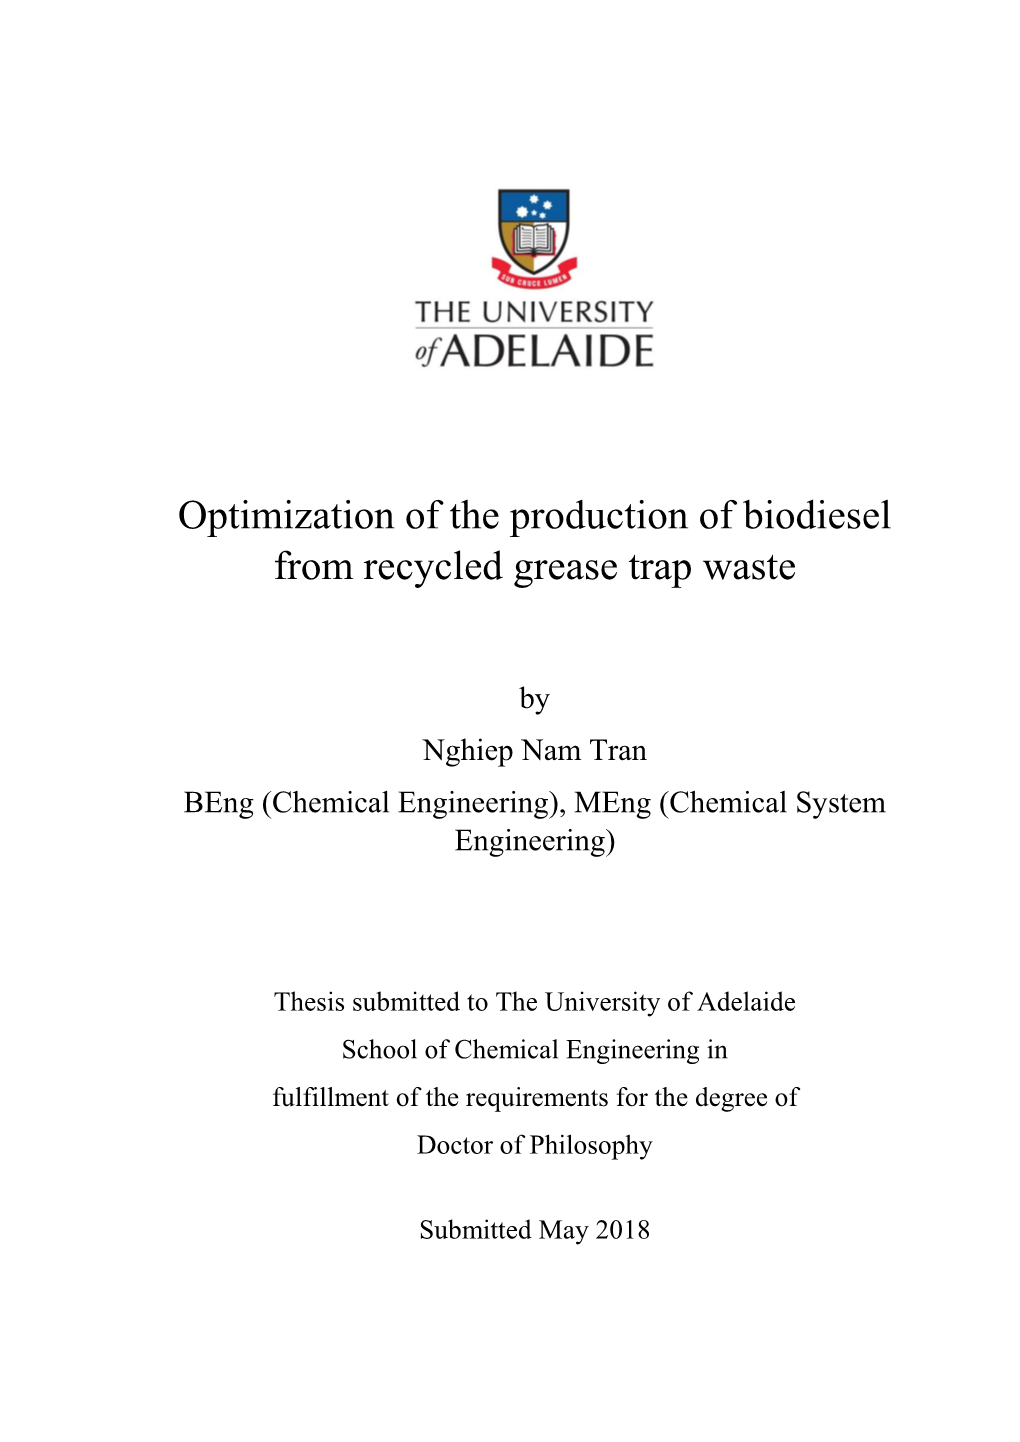 Optimization of the Production of Biodiesel from Recycled Grease Trap Waste